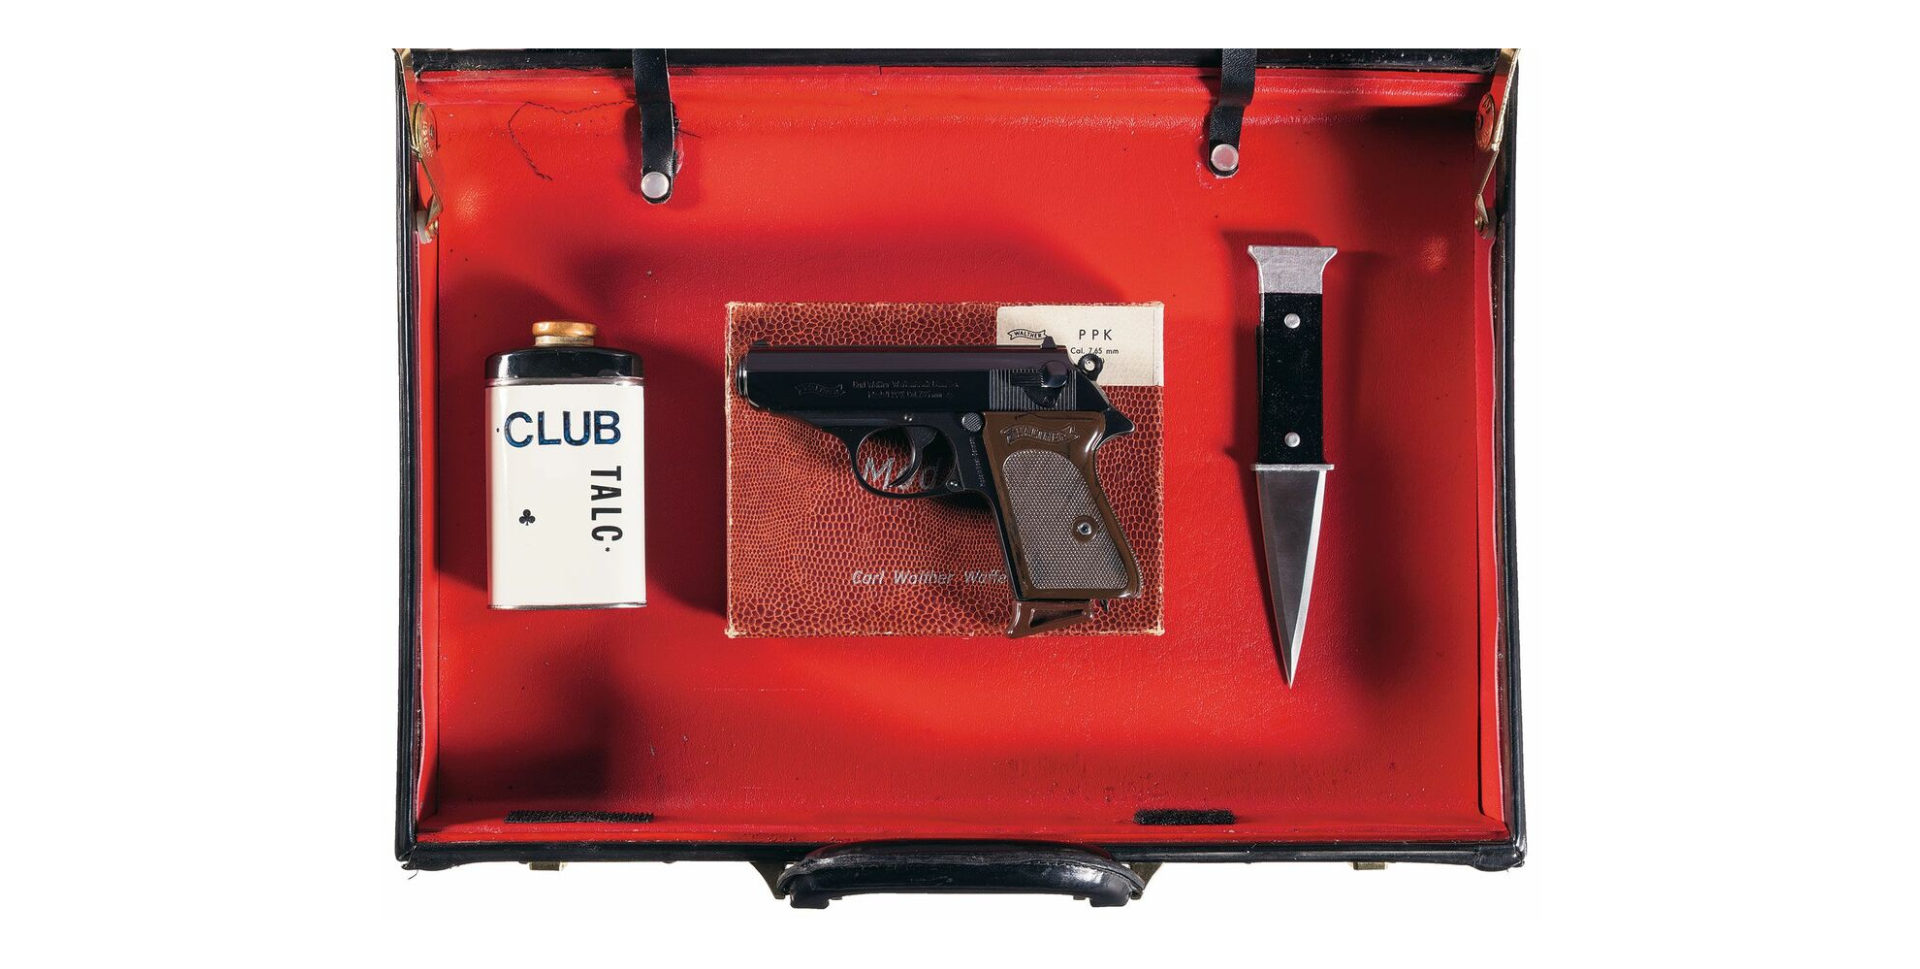 Guns in movies: James bond commemorative set with Walther PPK